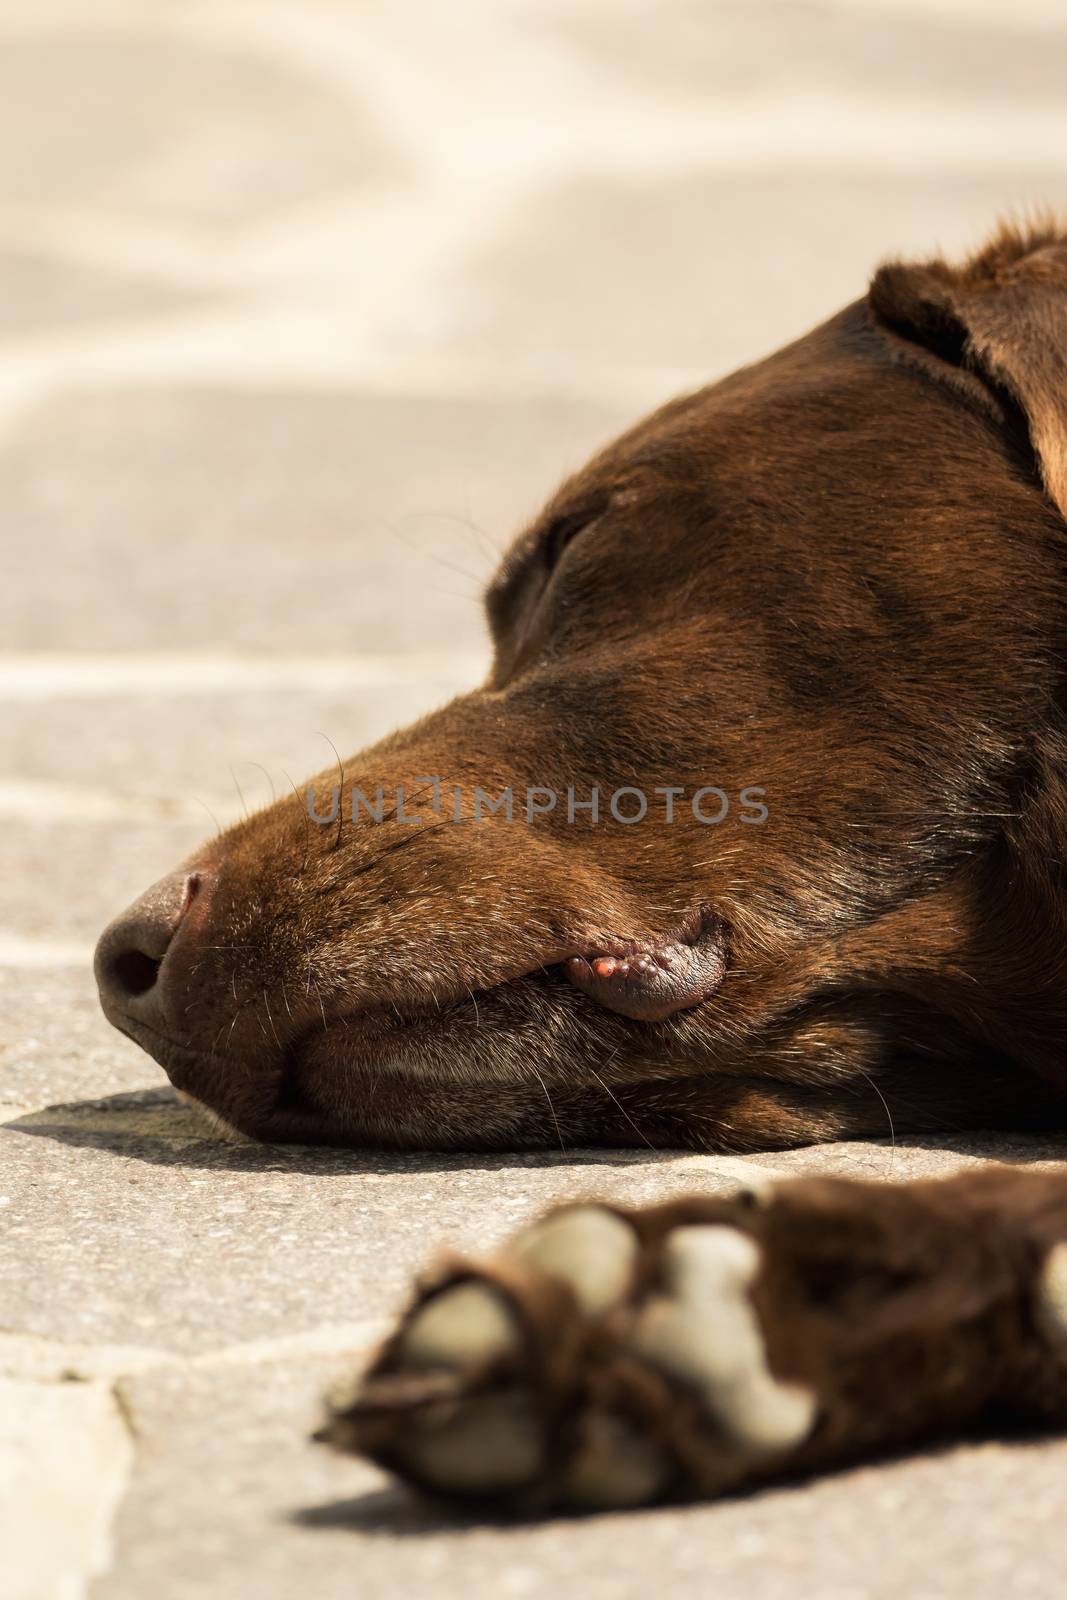 Head and paw of an old brown Labrador Retriever